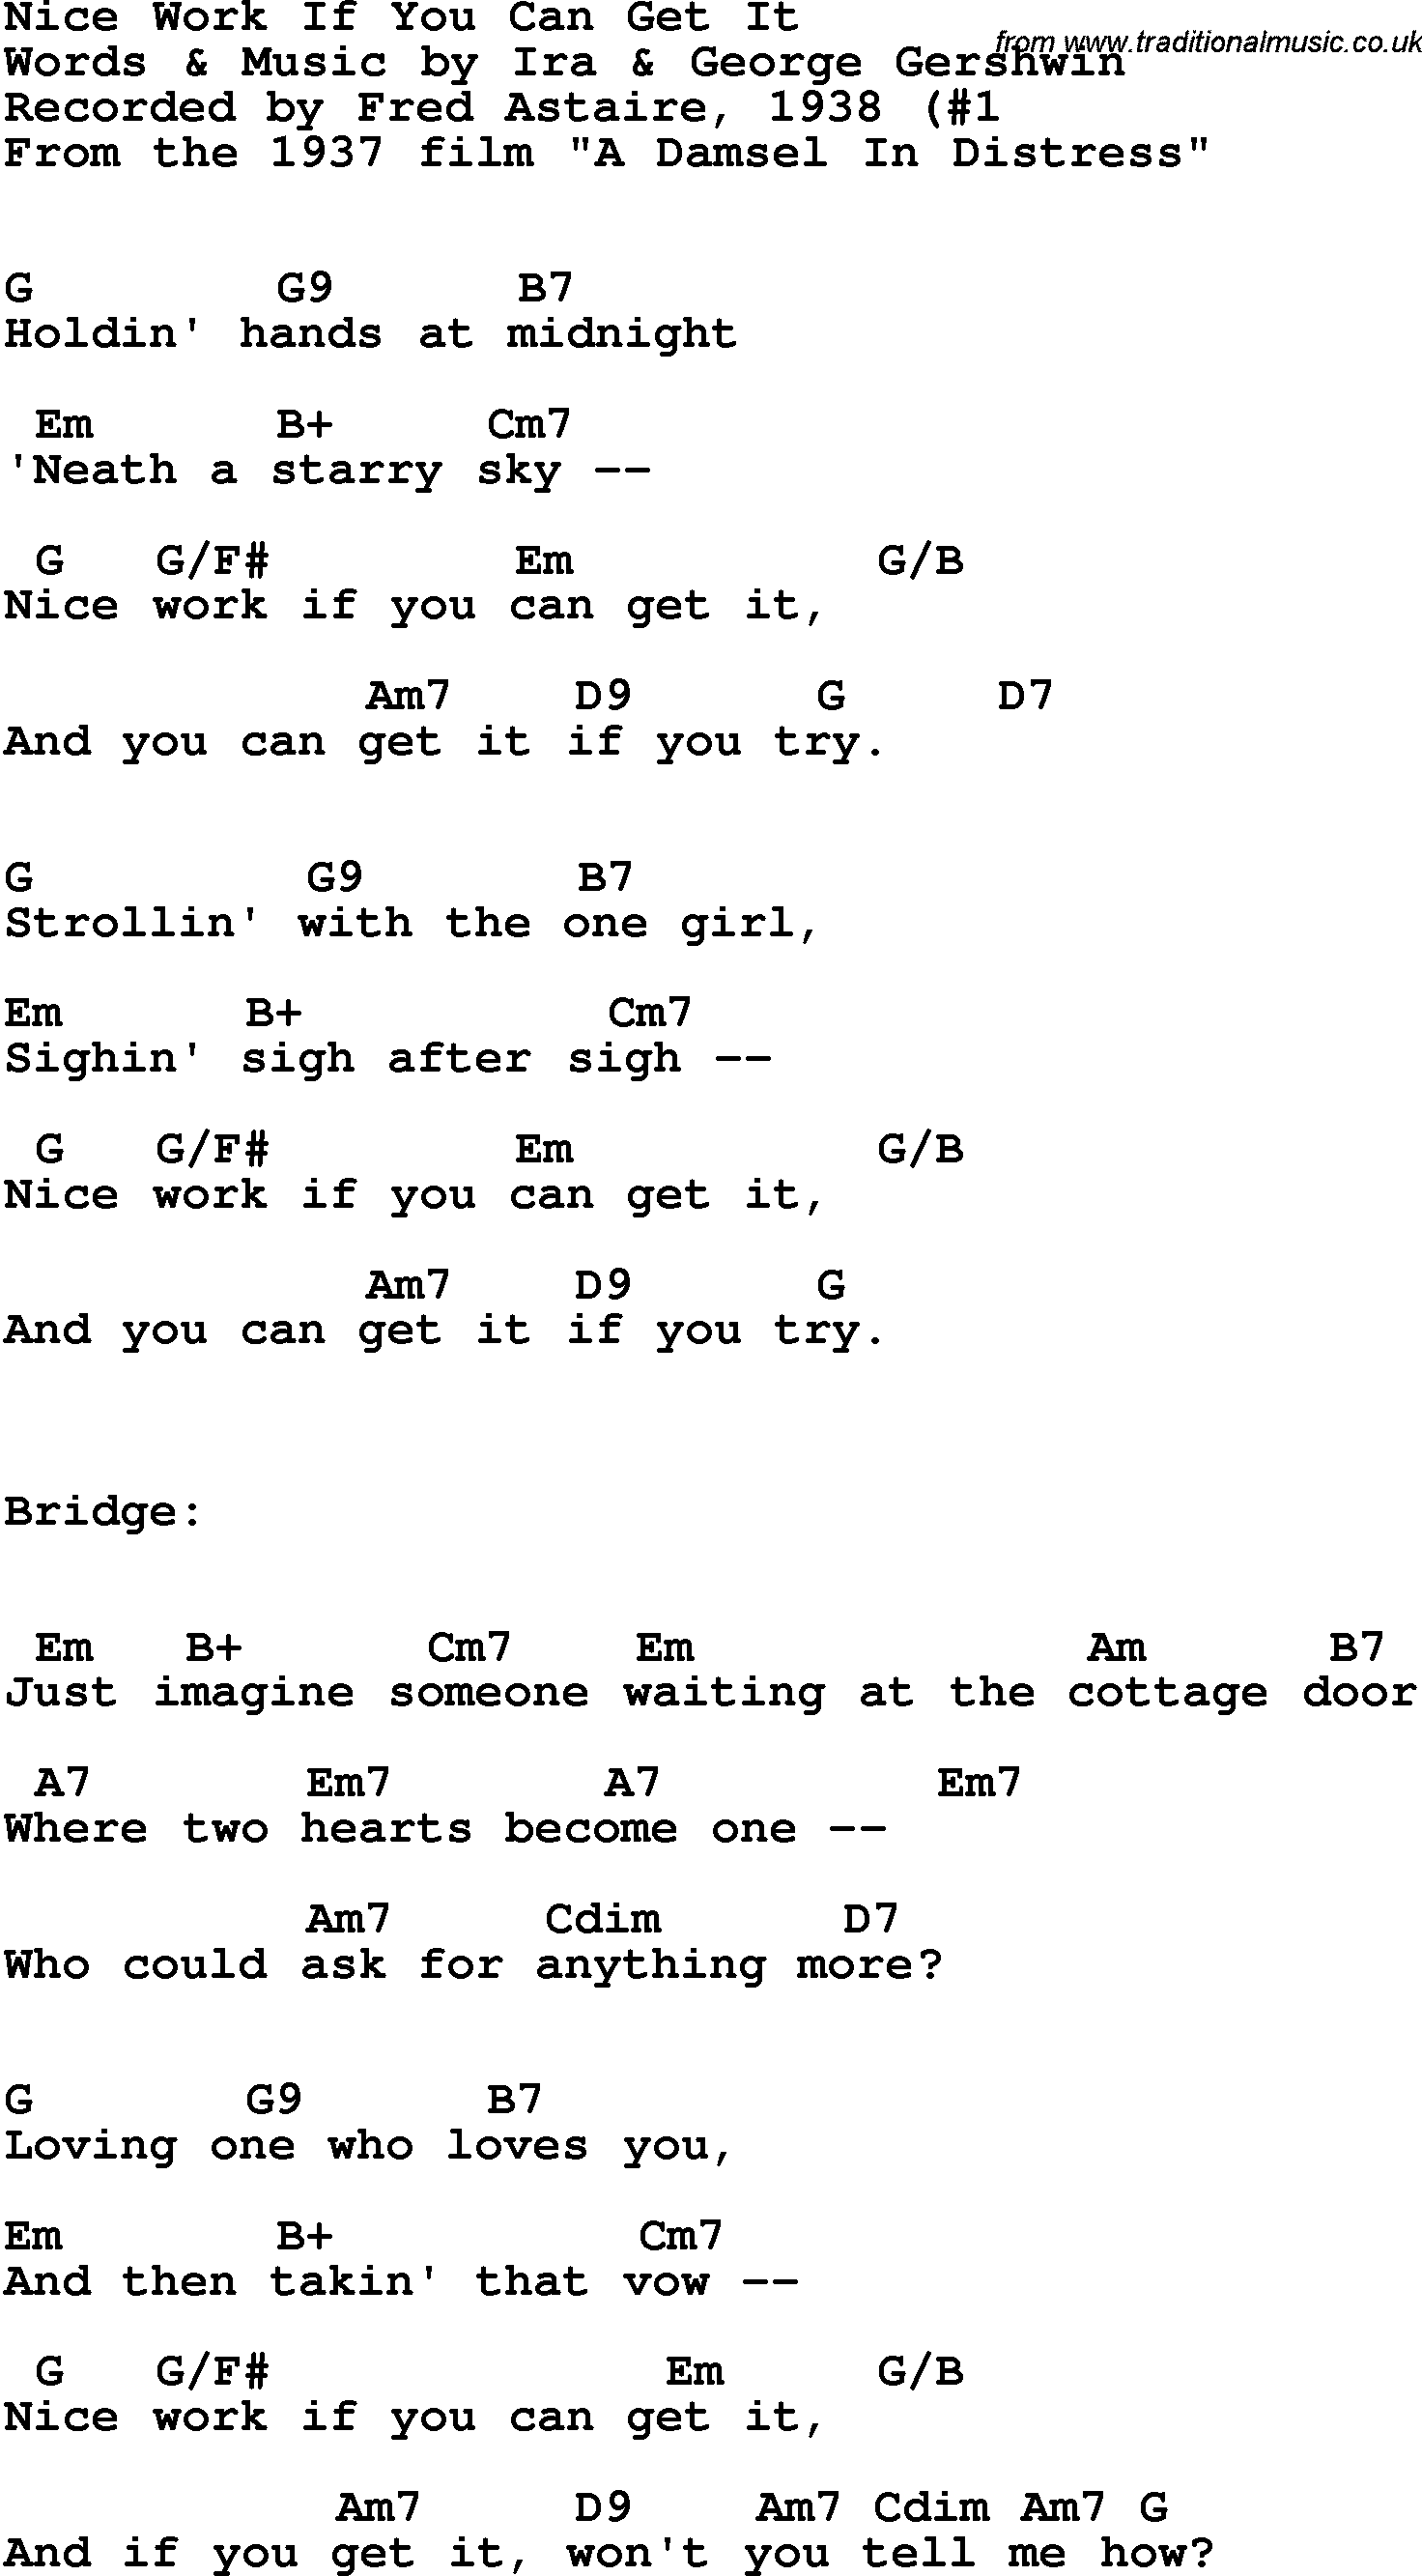 Song Lyrics with guitar chords for Nice Work If You Can Get It - Fred Astaire, 1938